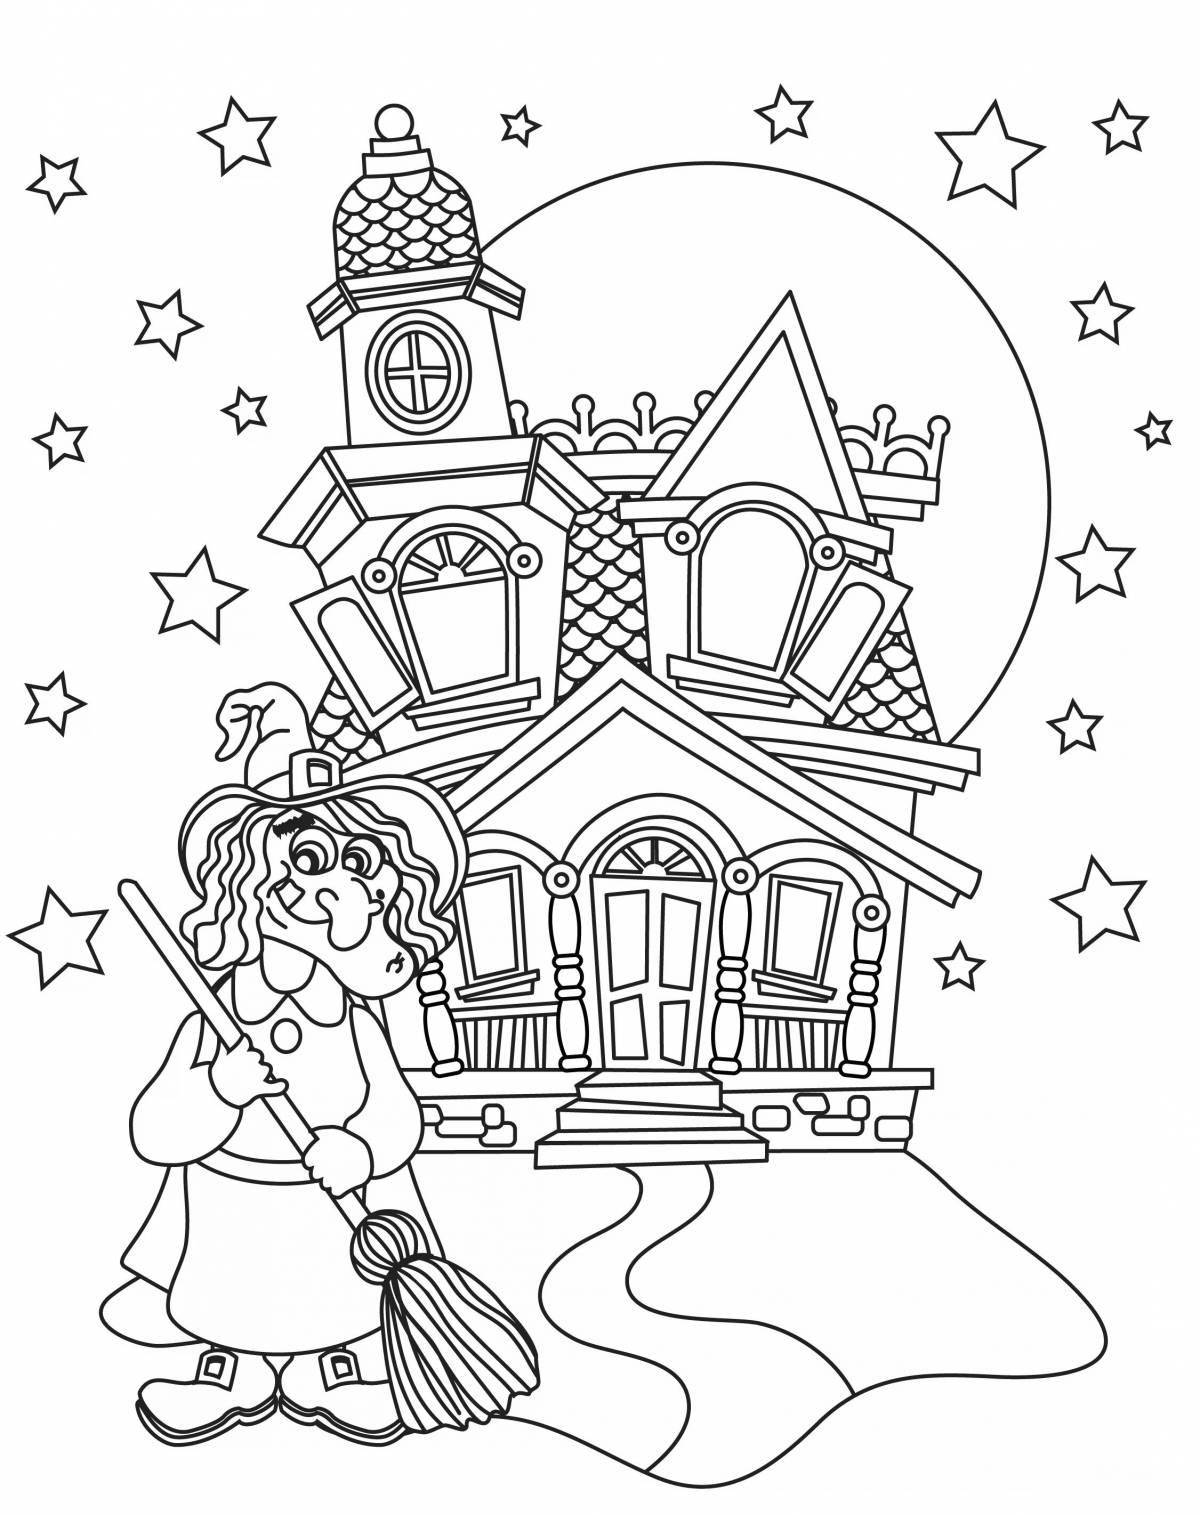 Gorgeous castle coloring book for girls